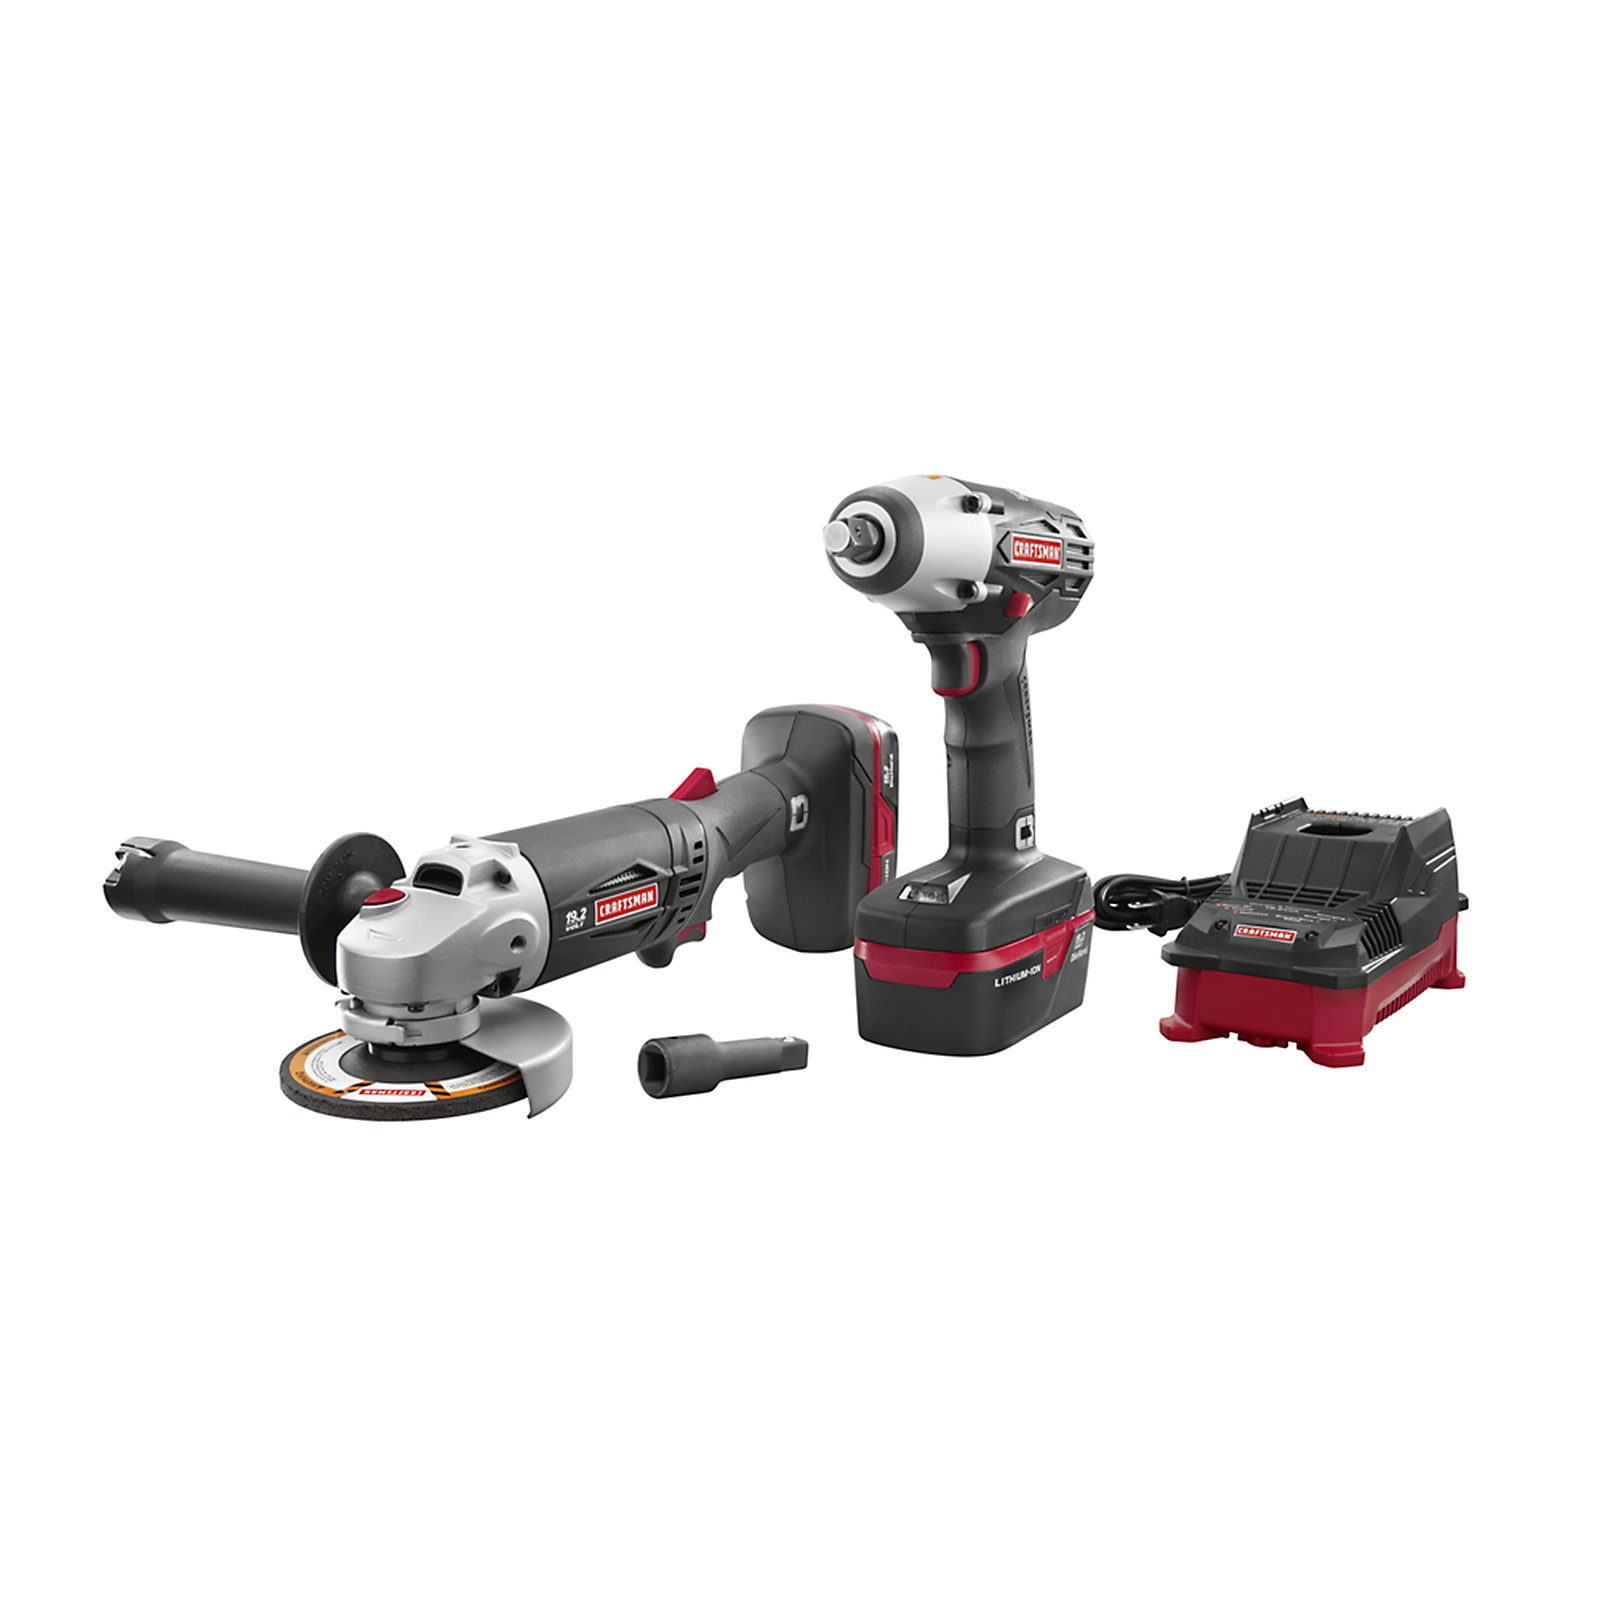 0033287160099 - C3 LITHIUM-ION 1/2 IMPACT WRENCH AND ANGLE GRINDER KIT